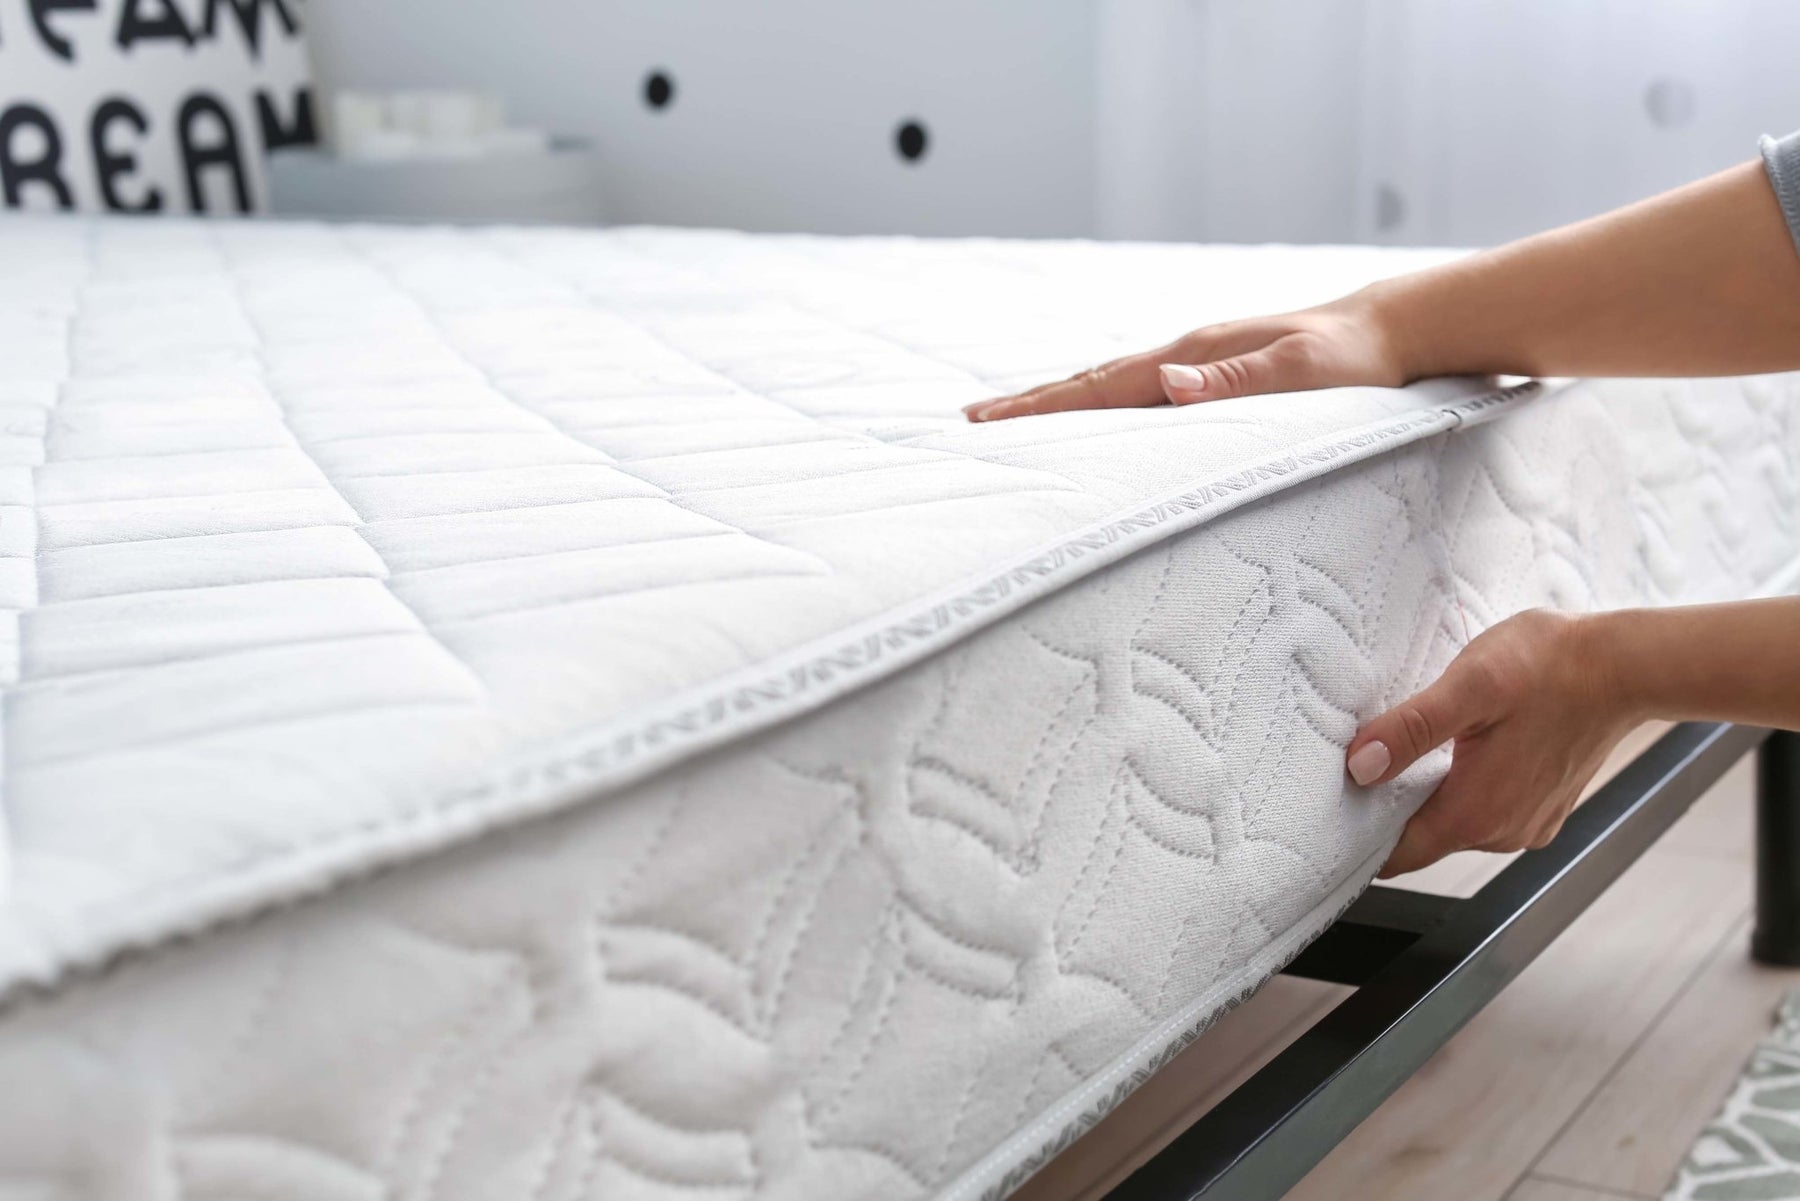 The Best RV Mattresses for Side Sleepers